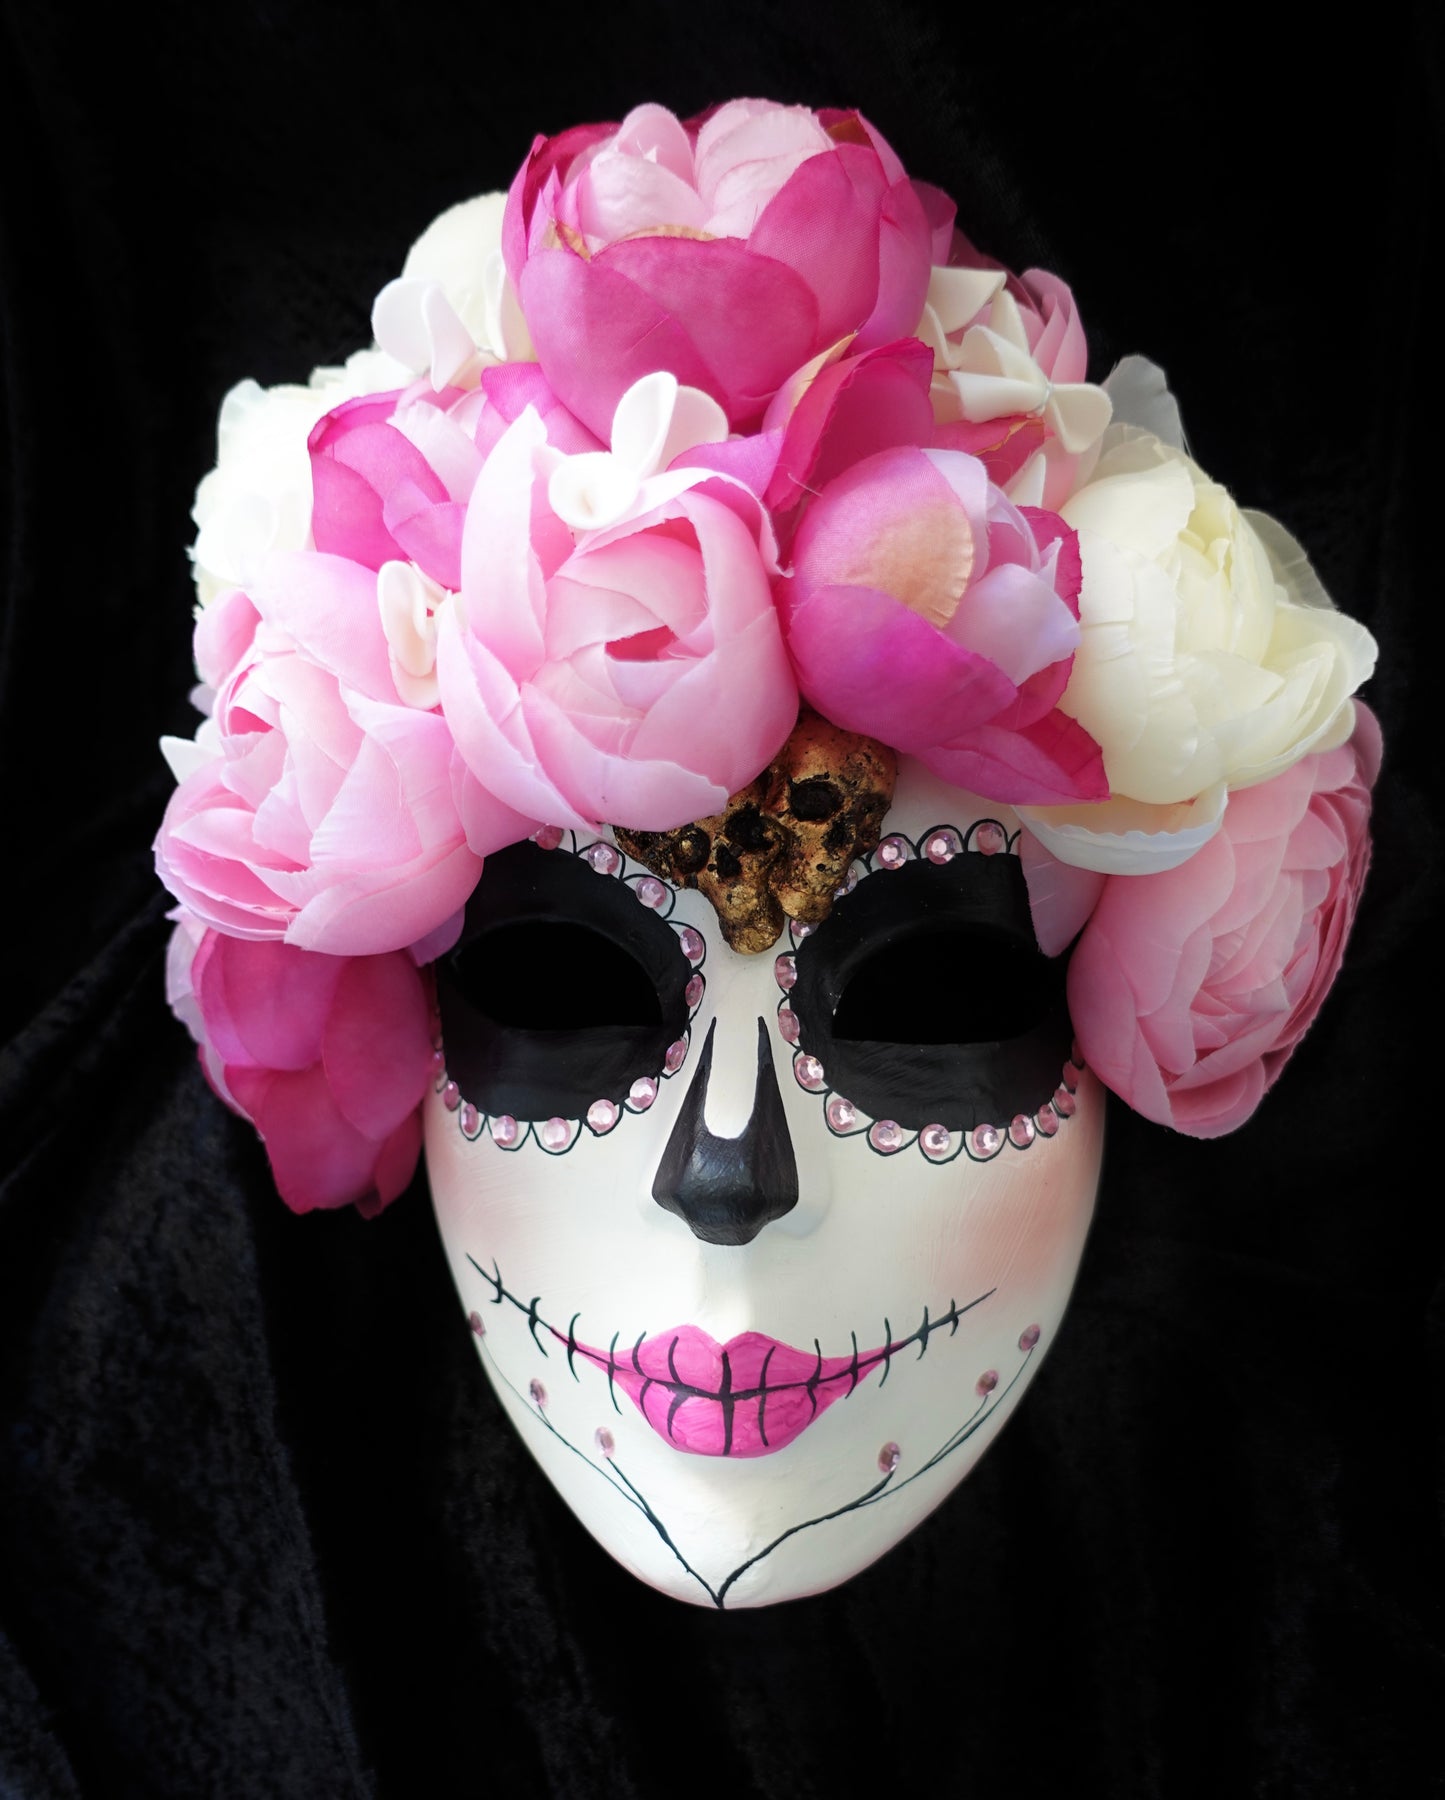 Catherine mask original model of the day of the death in Mexico